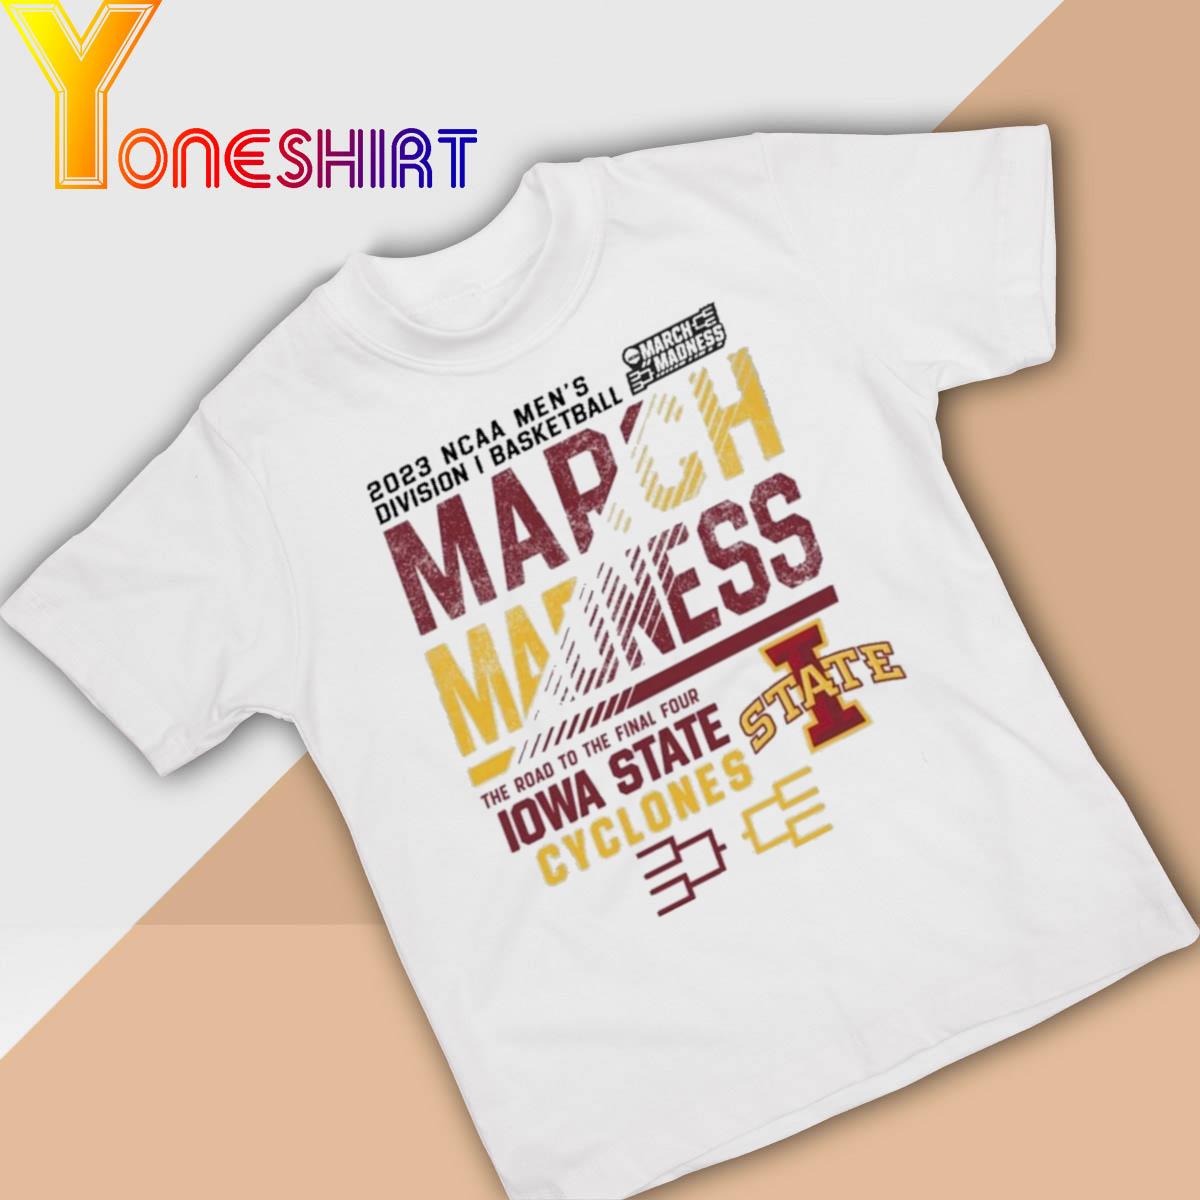 Original 2023 Ncaa Men's Division I Basketball March Madness the road to the Final Four Iowa State Cyclones shirt